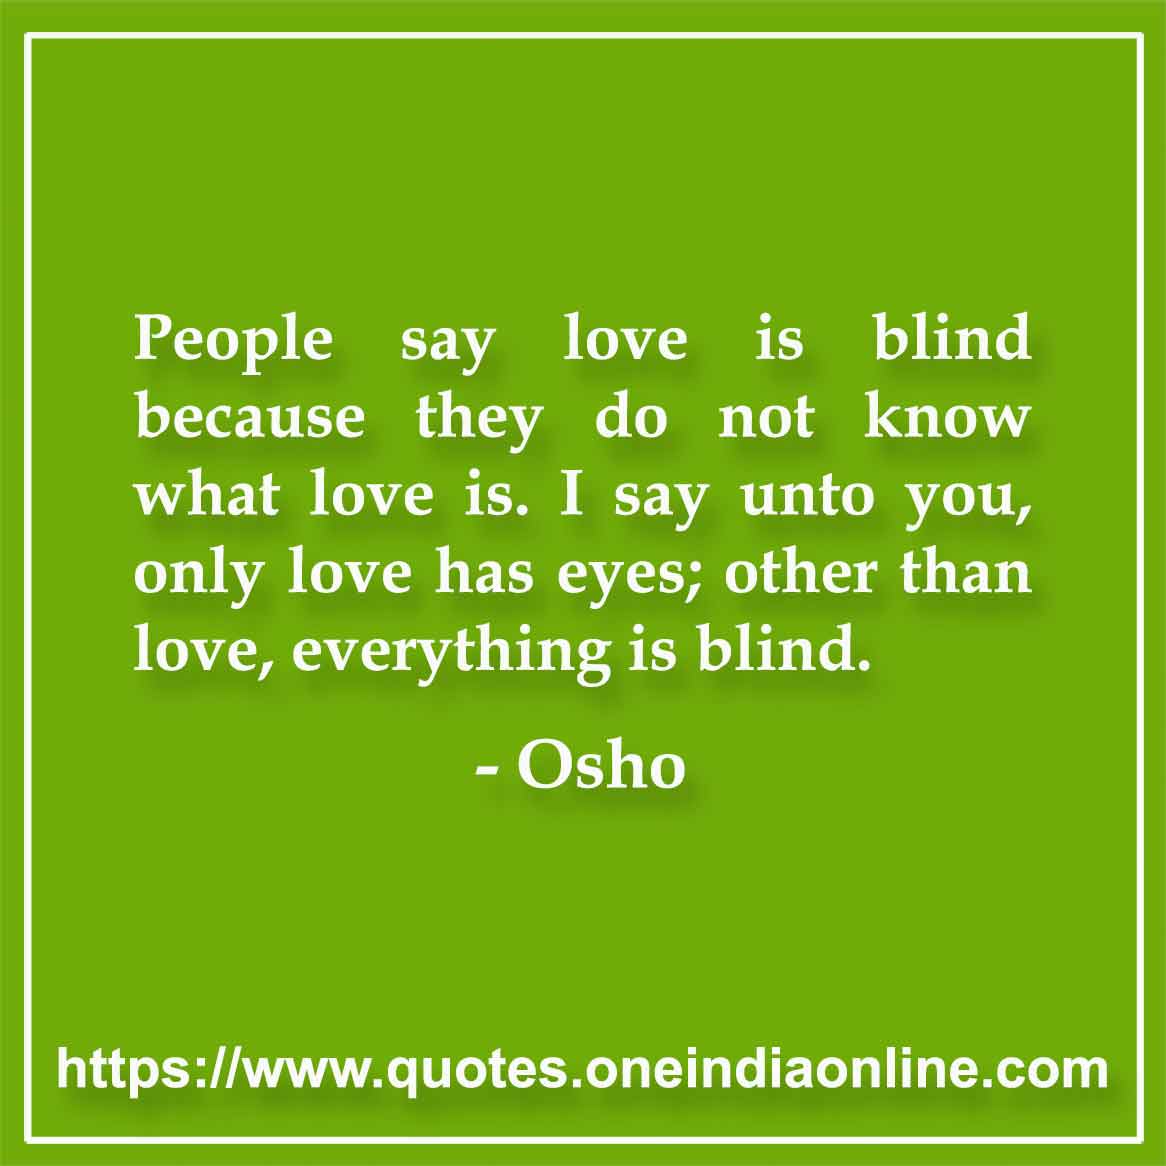 People say love is blind because they do not know what love is. I say unto you, only love has eyes; other than love, everything is blind.